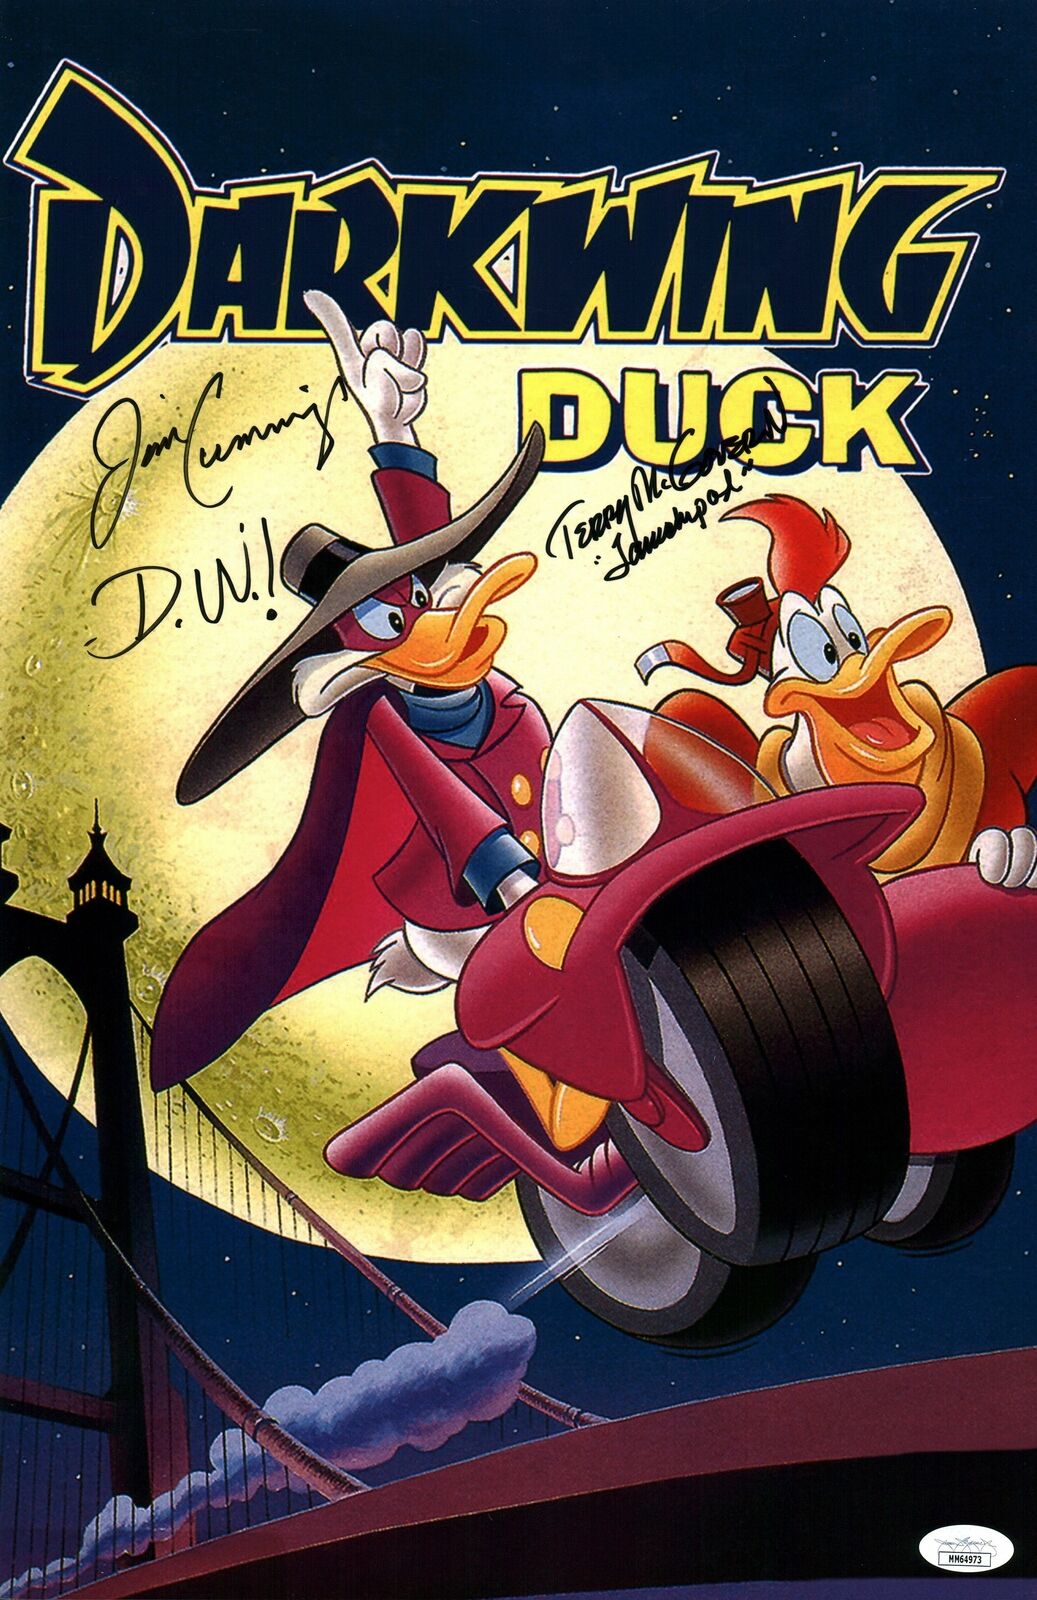 Darkwing Duck 11x17 Photo Poster painting Poster Signed Autograph Cummings McGovern JSA COA Auto